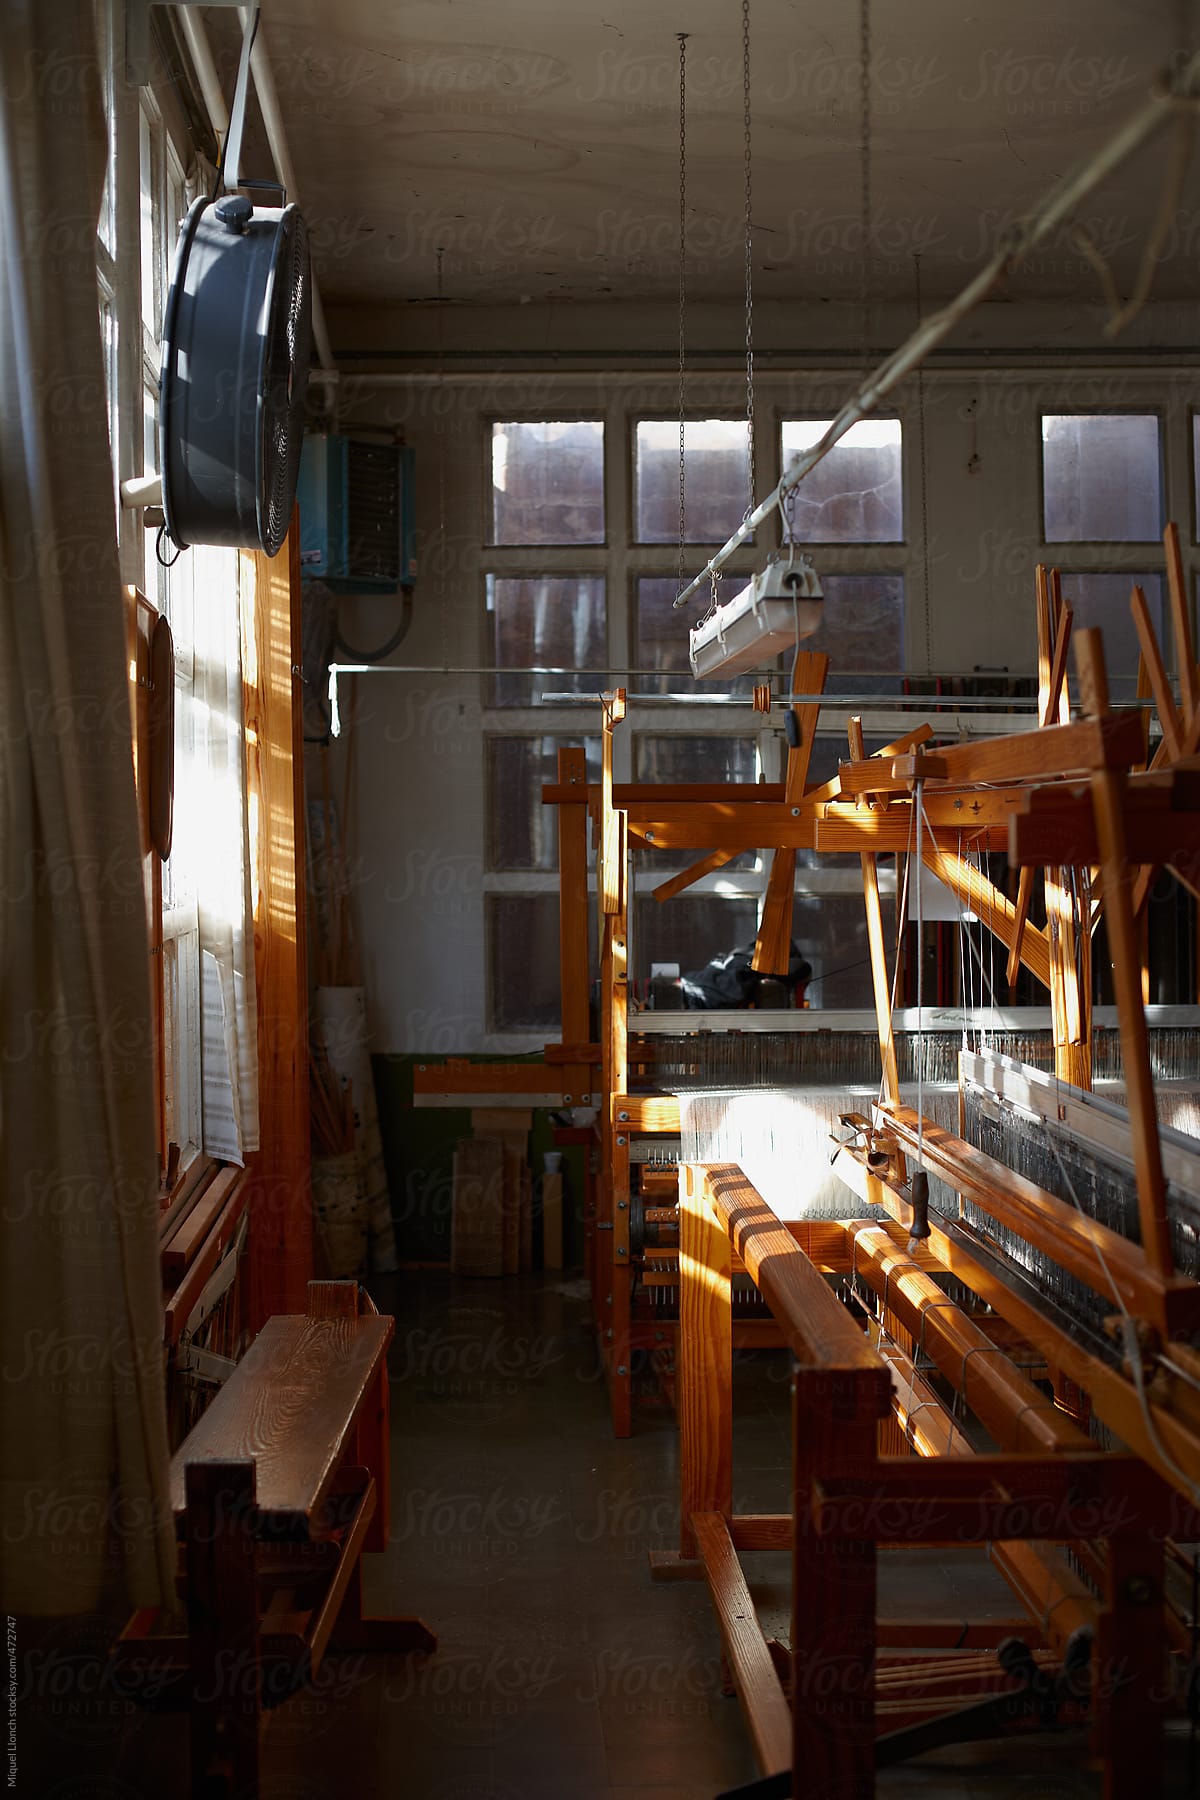 Artisanal textile workshop with manual looms